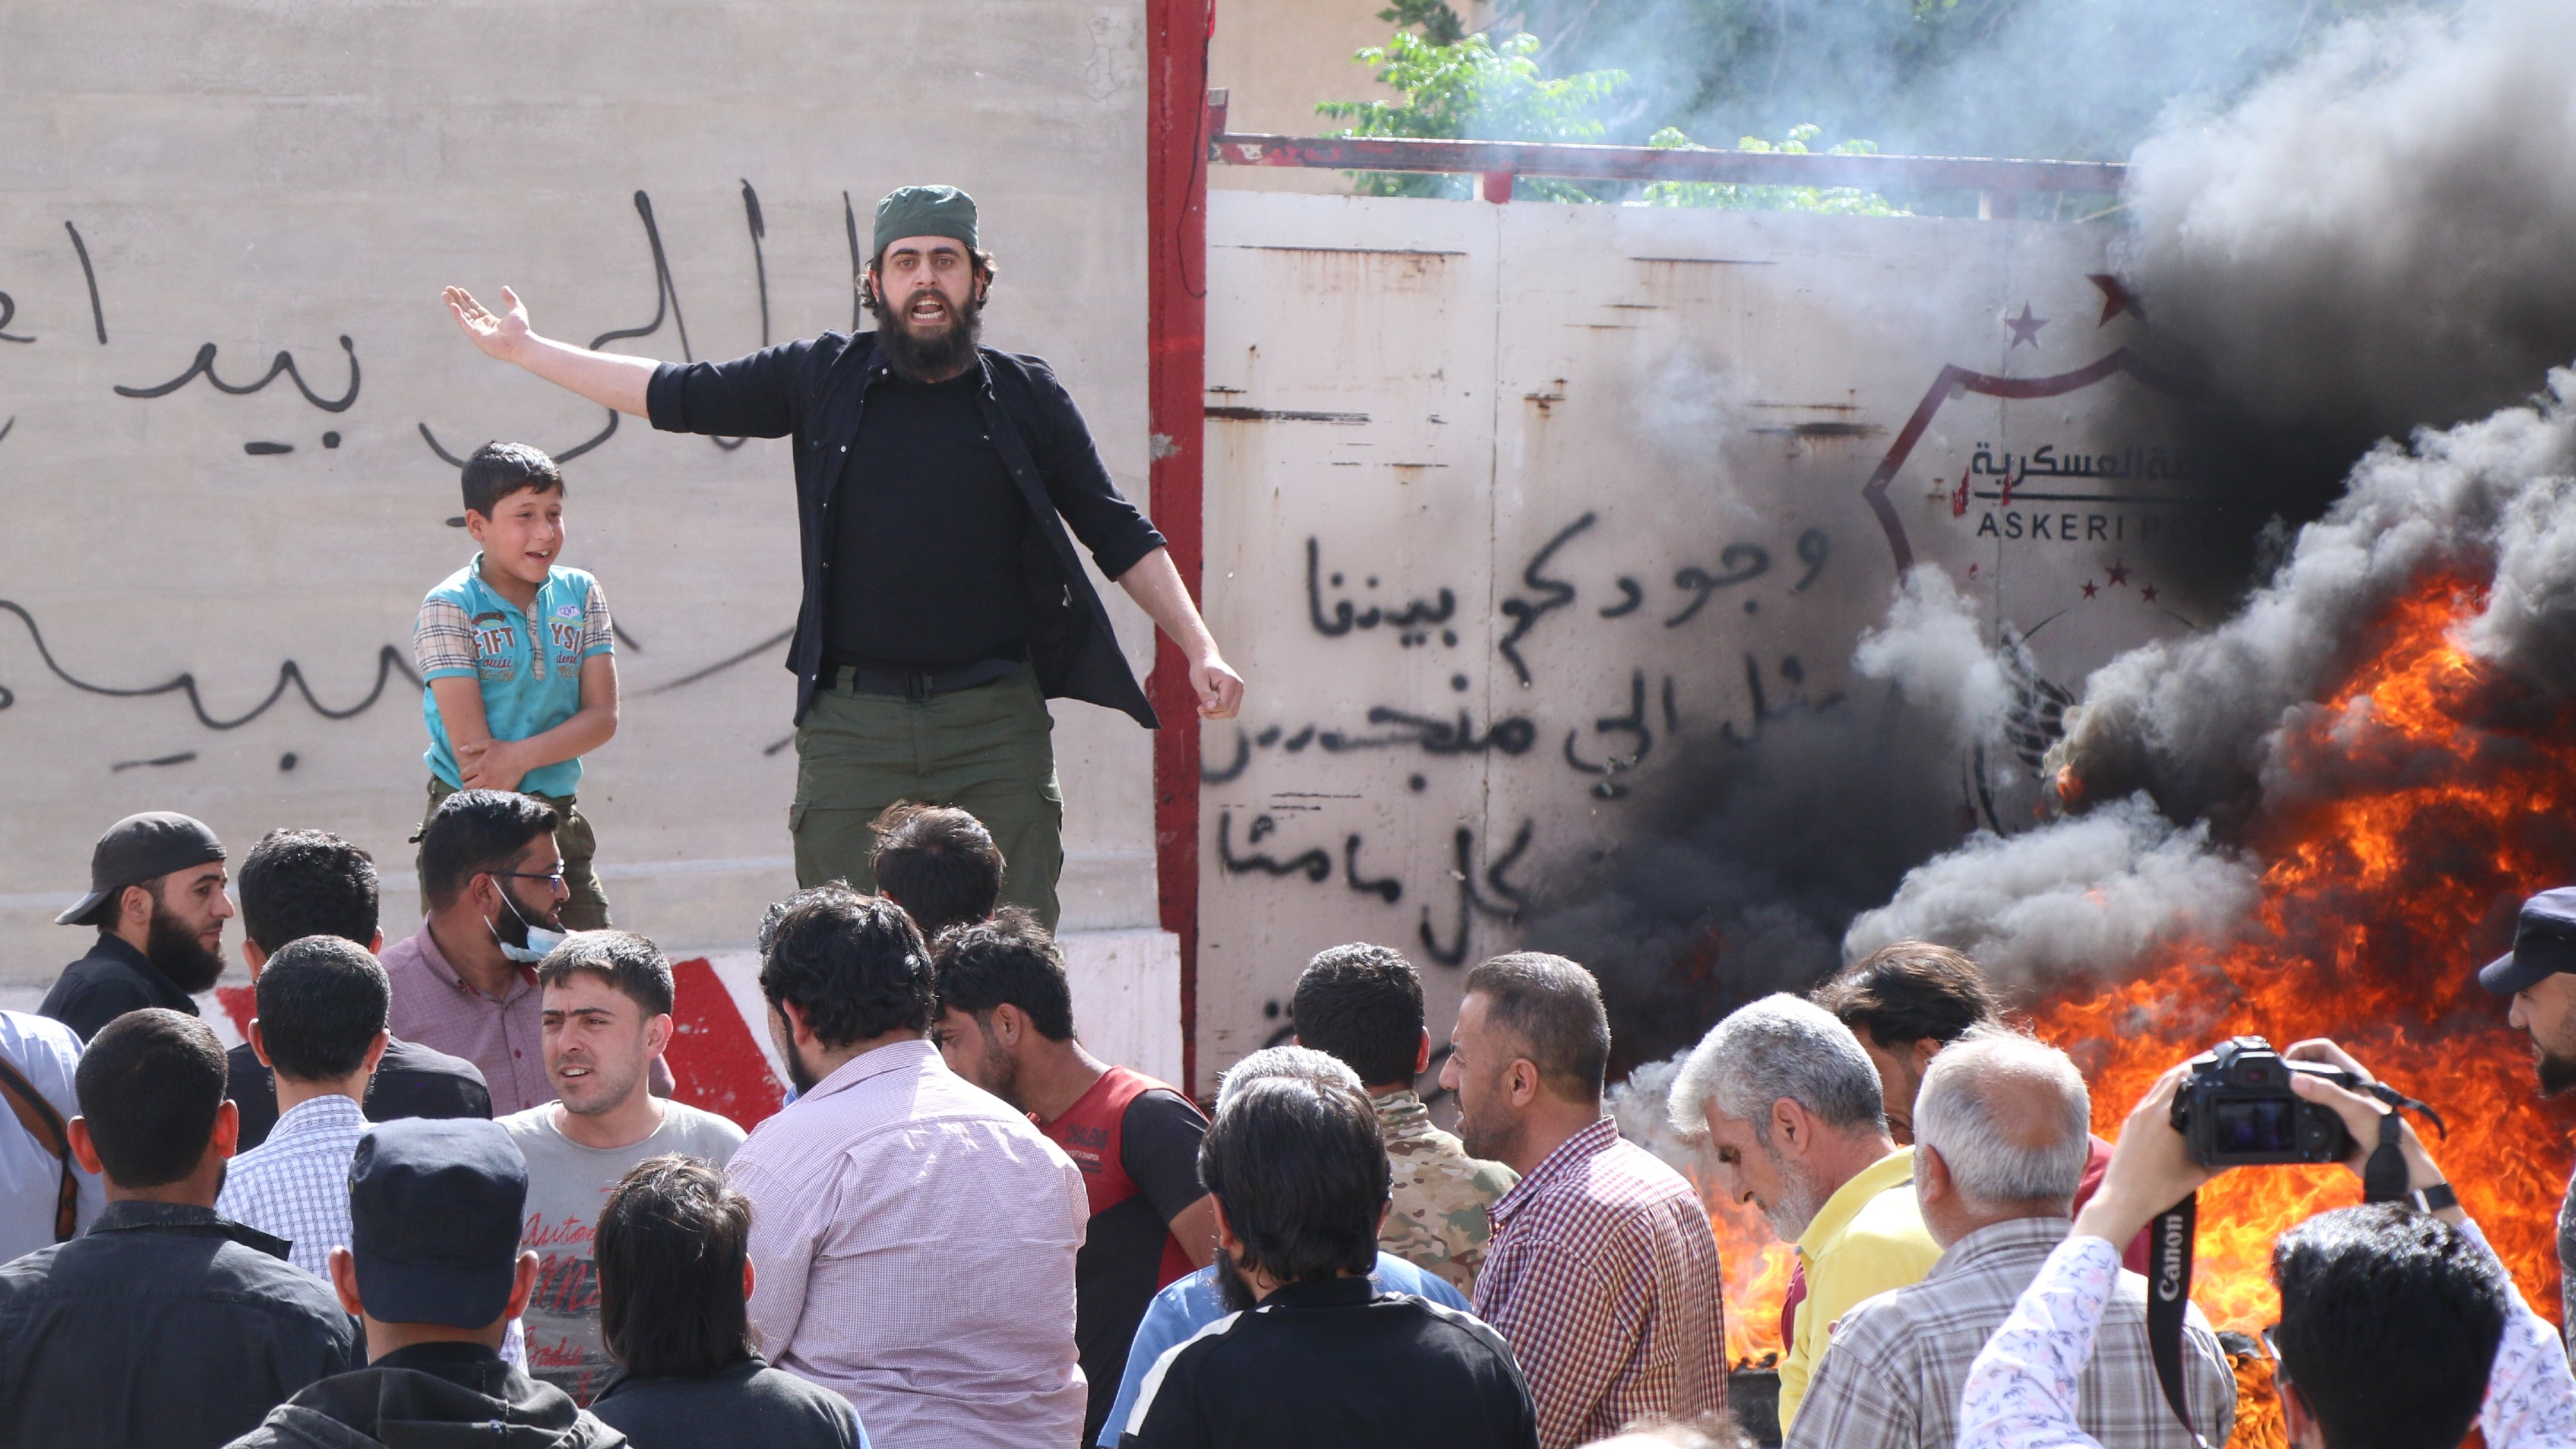 Protesters gather outside a military police station in al-Bab city in northwest Syria on 22 May 2022. (MEE/Walid al-ldlibi)